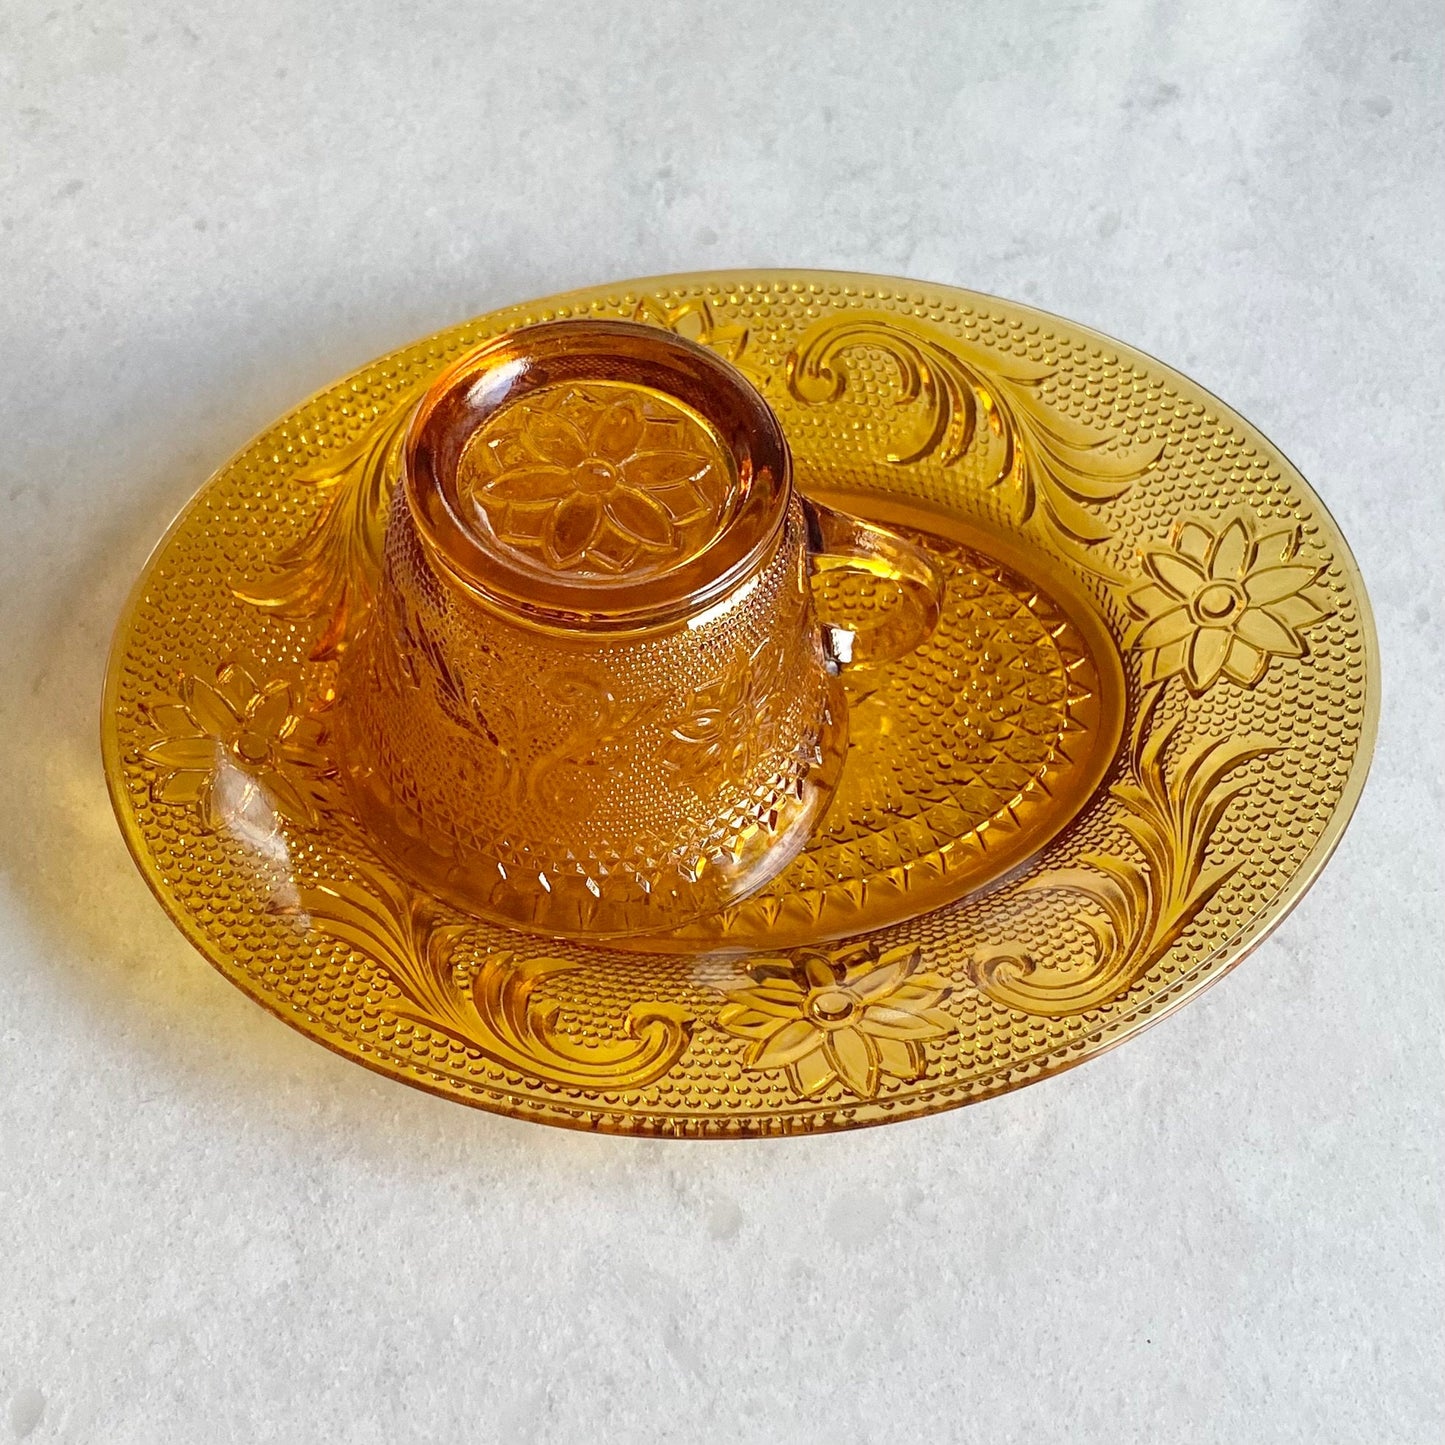 Vintage Tiara Glass Amber Chantilly Snack Sets (circa 1971 - 1989) - 8 pieces total, 4 plates and 4 cups